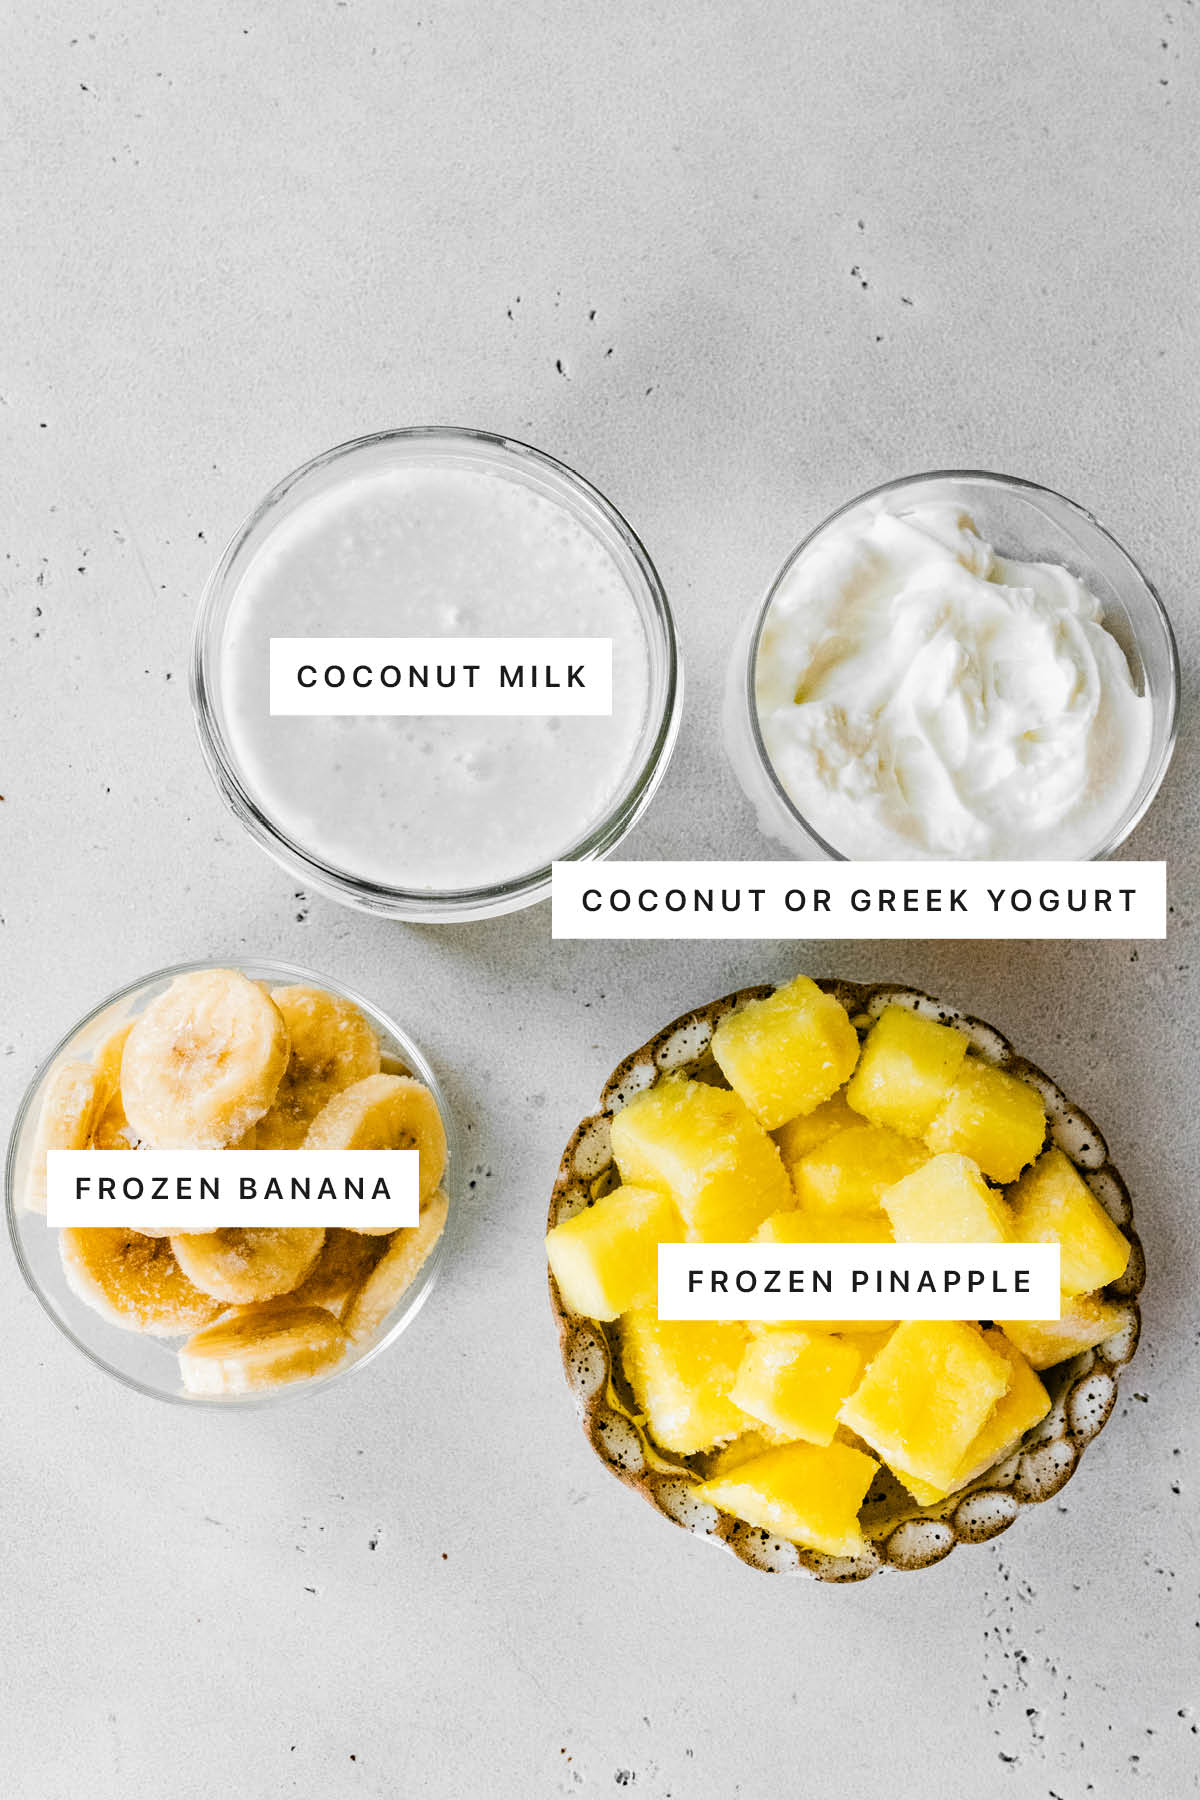 Ingredients measured out to make Pineapple Smoothie: coconut milk, coconut or Greek yogurt, frozen banana and frozen pineapple.